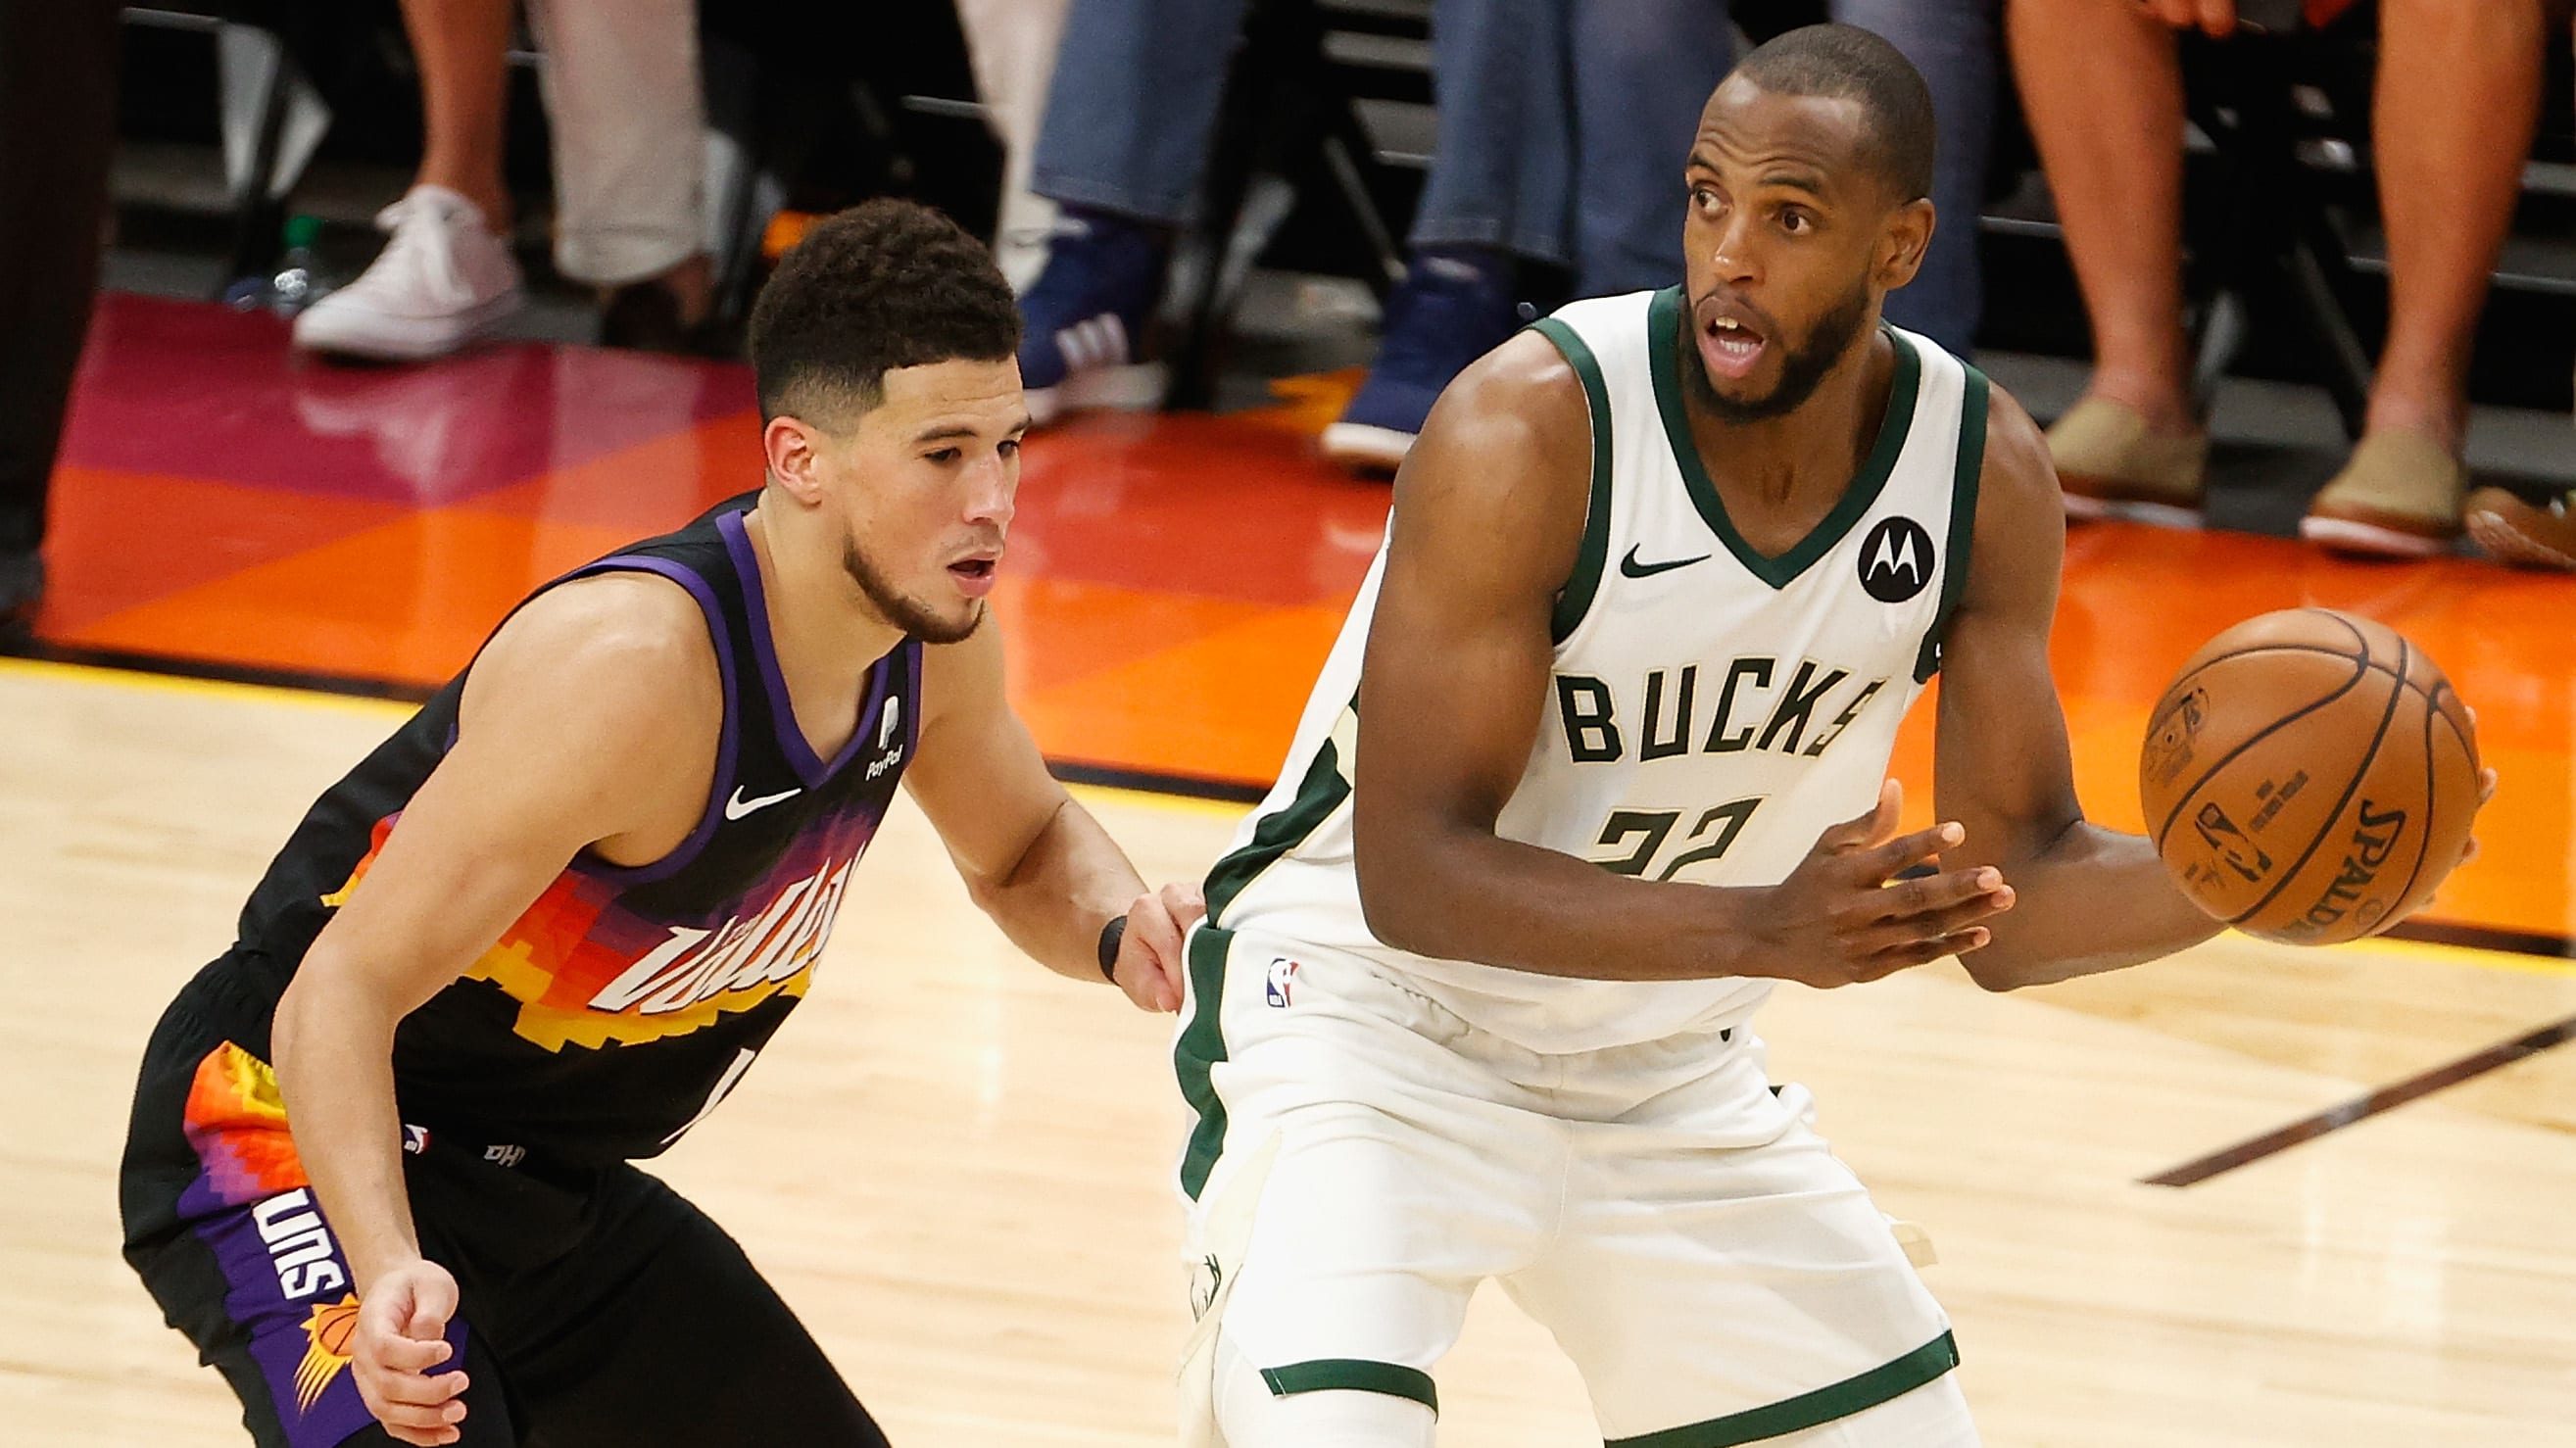 When is Game 7 of the NBA Finals? Date, Time, TV Schedule For Bucks vs Suns